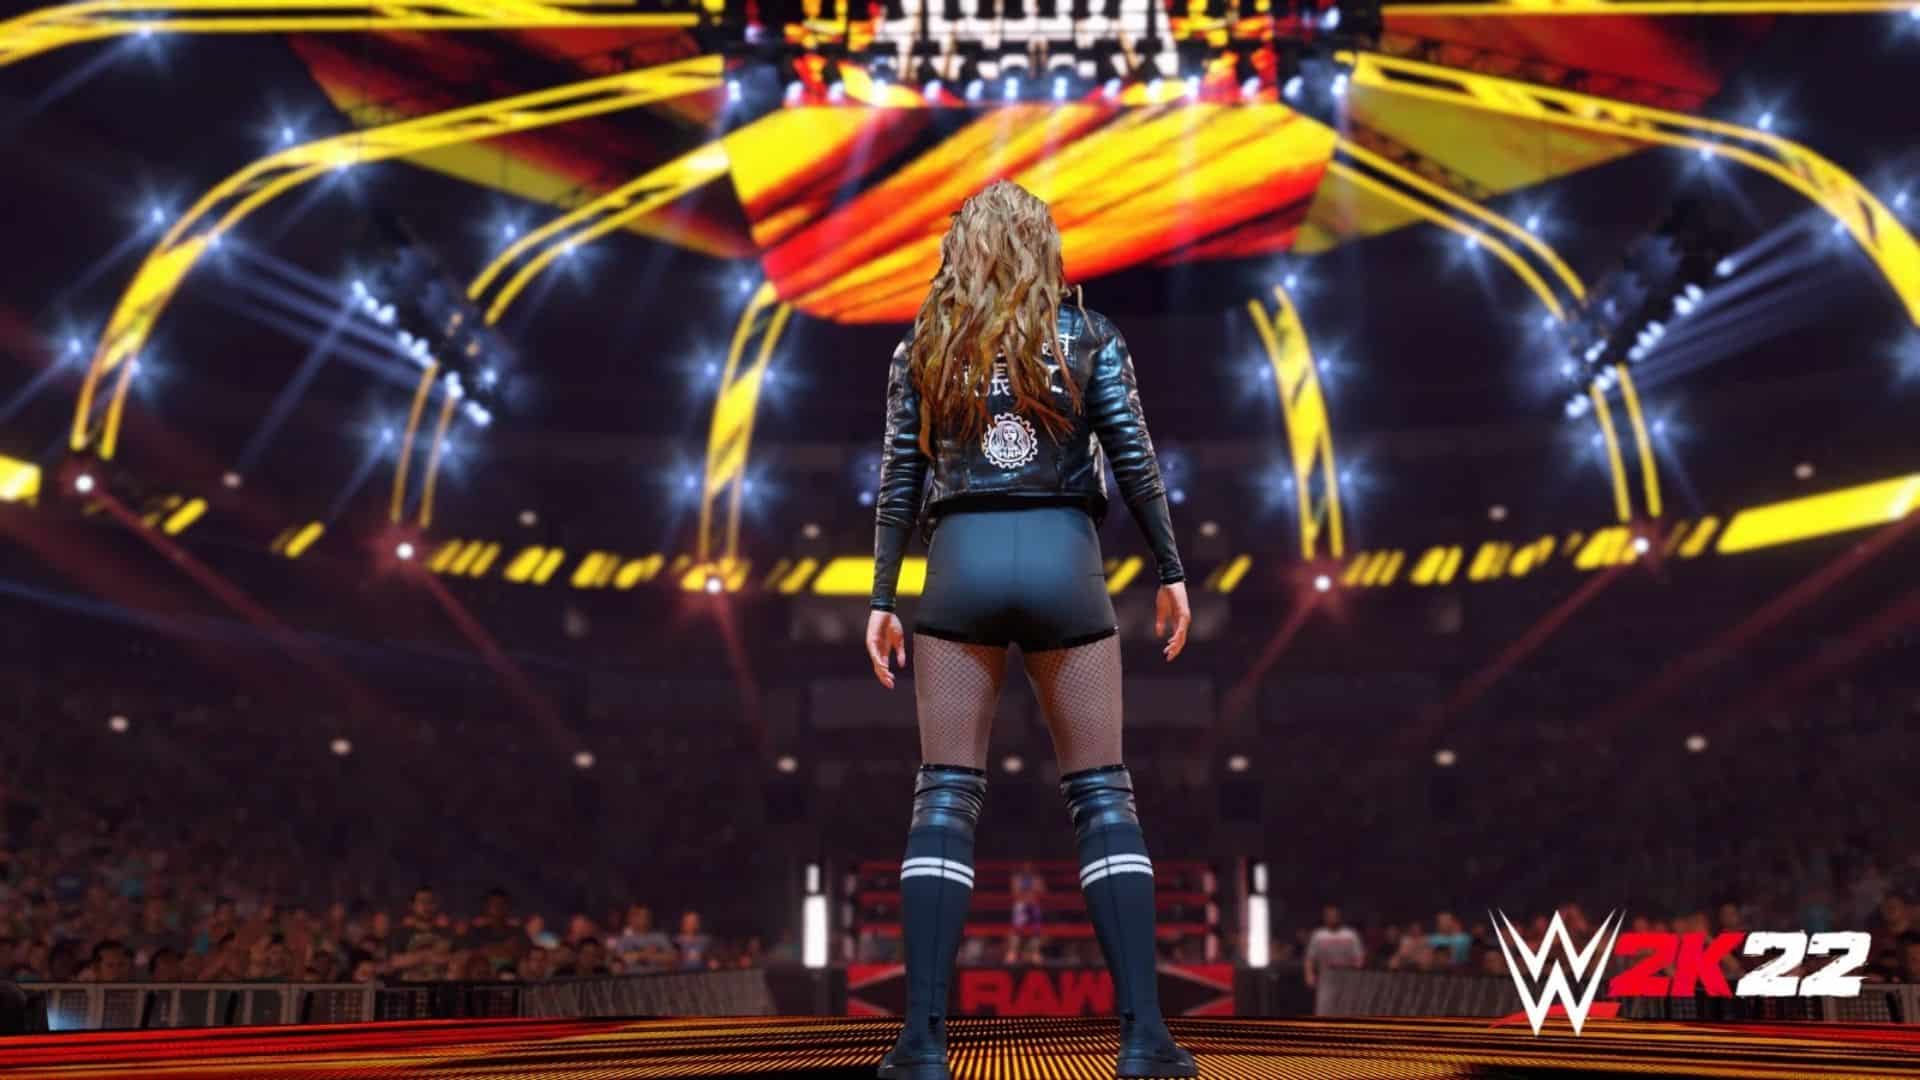 behind view of becky lynch entrance